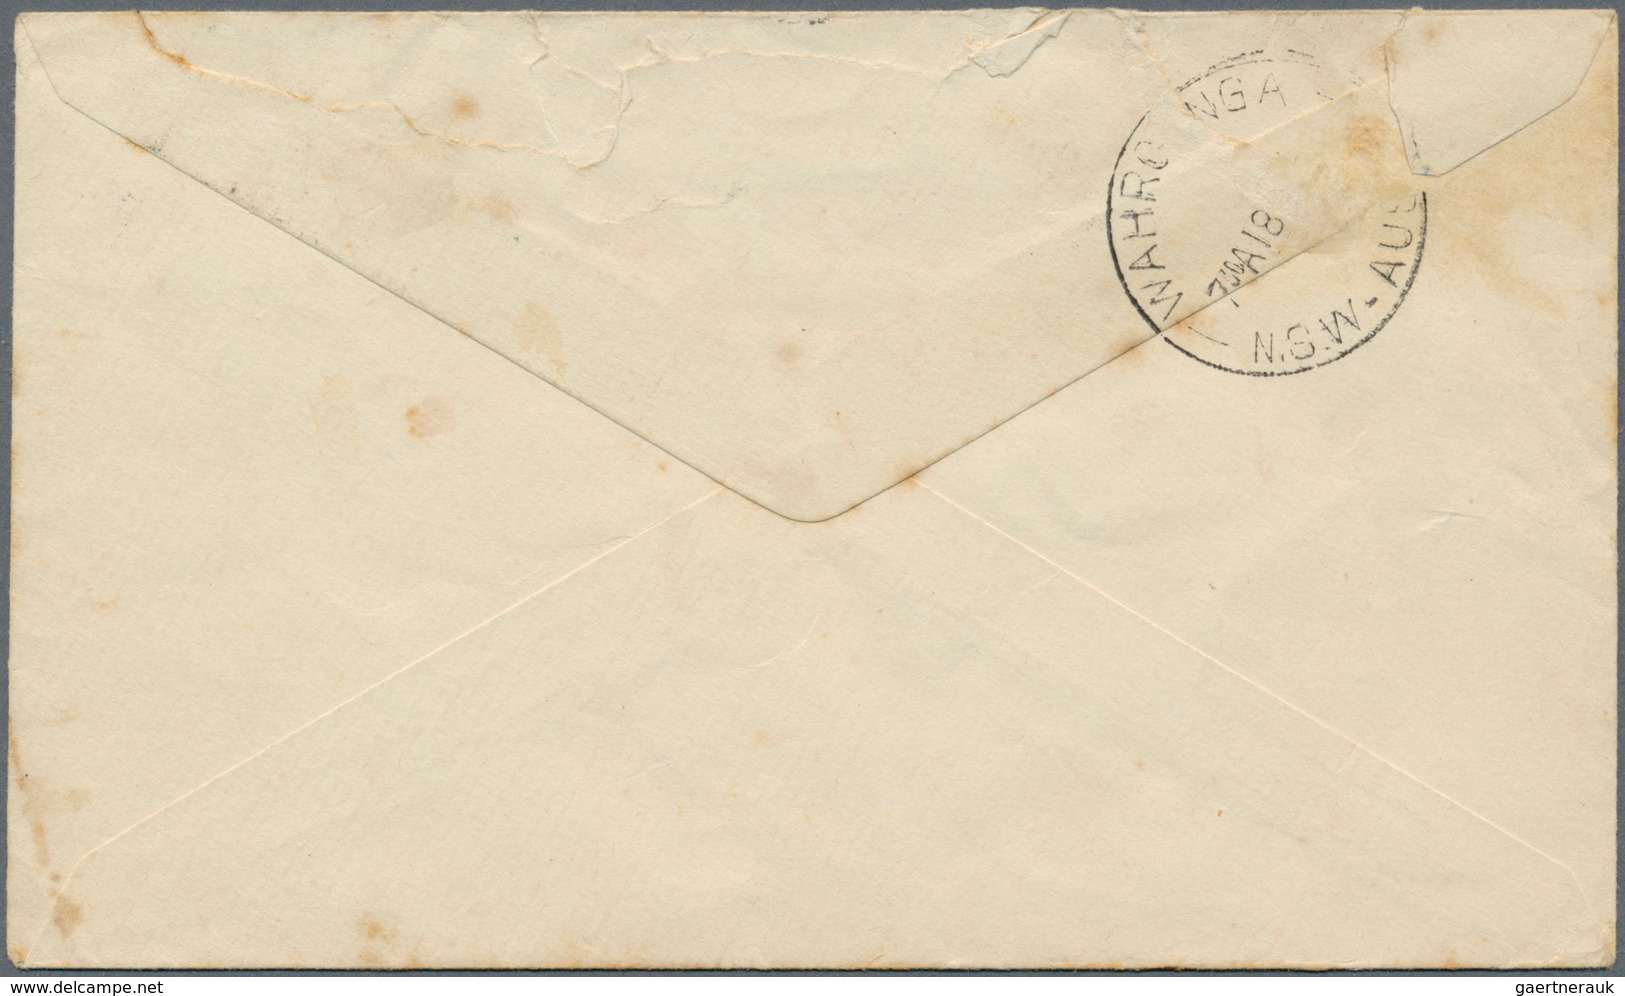 Malaiische Staaten - Johor: 1938 Airmail Cover From Kota Tinggi To Australia Franked By 1922 5c. Str - Johore